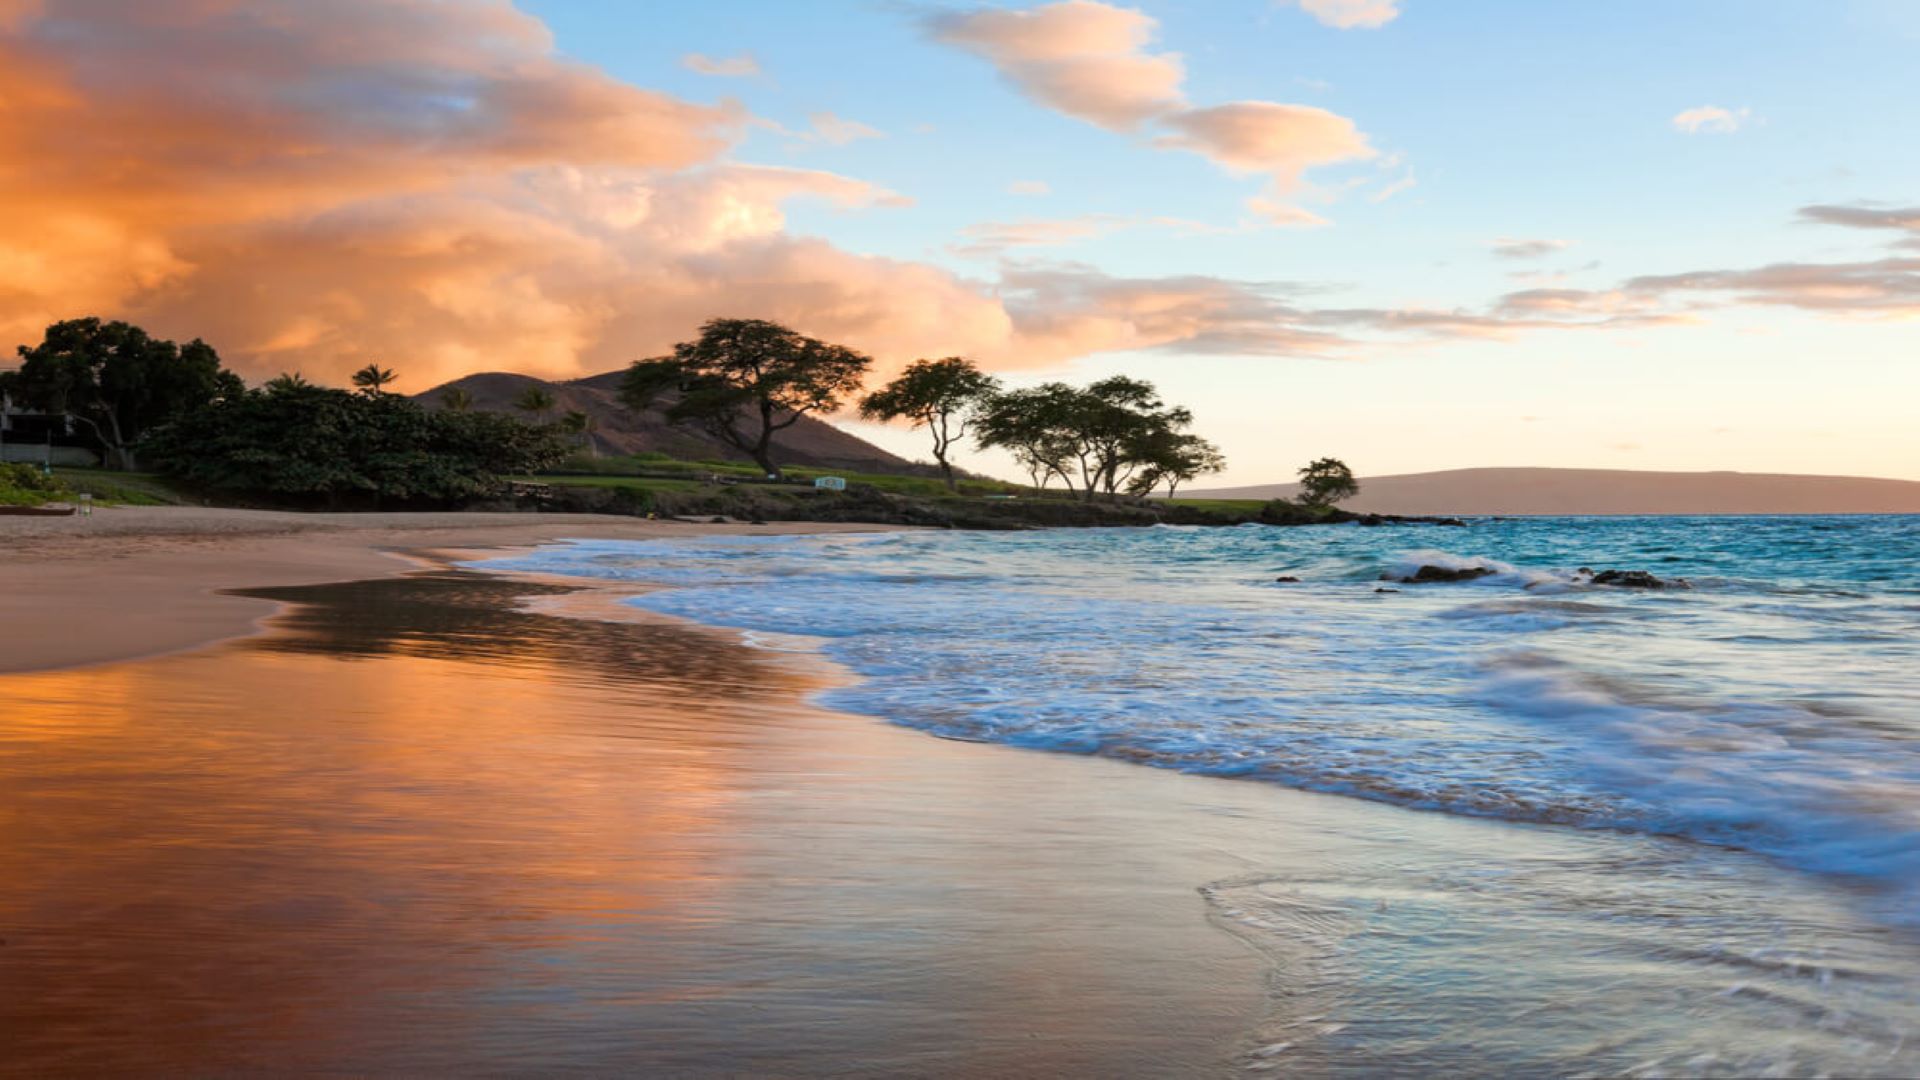 A trip to the beach is among the most romantic things to do in Maui